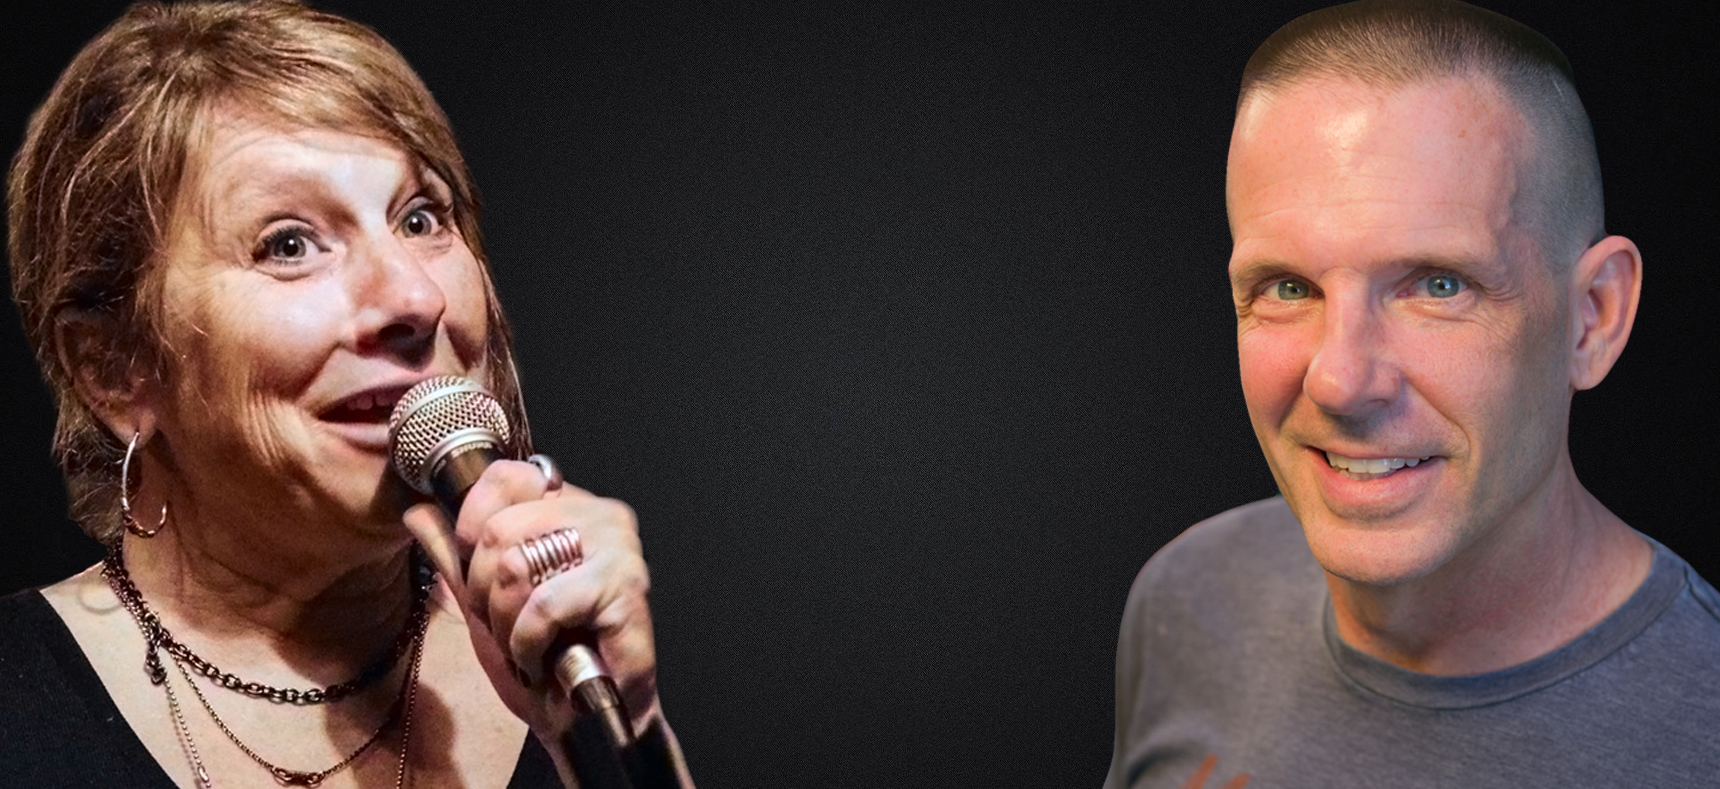 CO-Headliners Chet Sewell and Ellen Sugarman this Friday night at Comedy Heights at Bay Bridge Brewing.